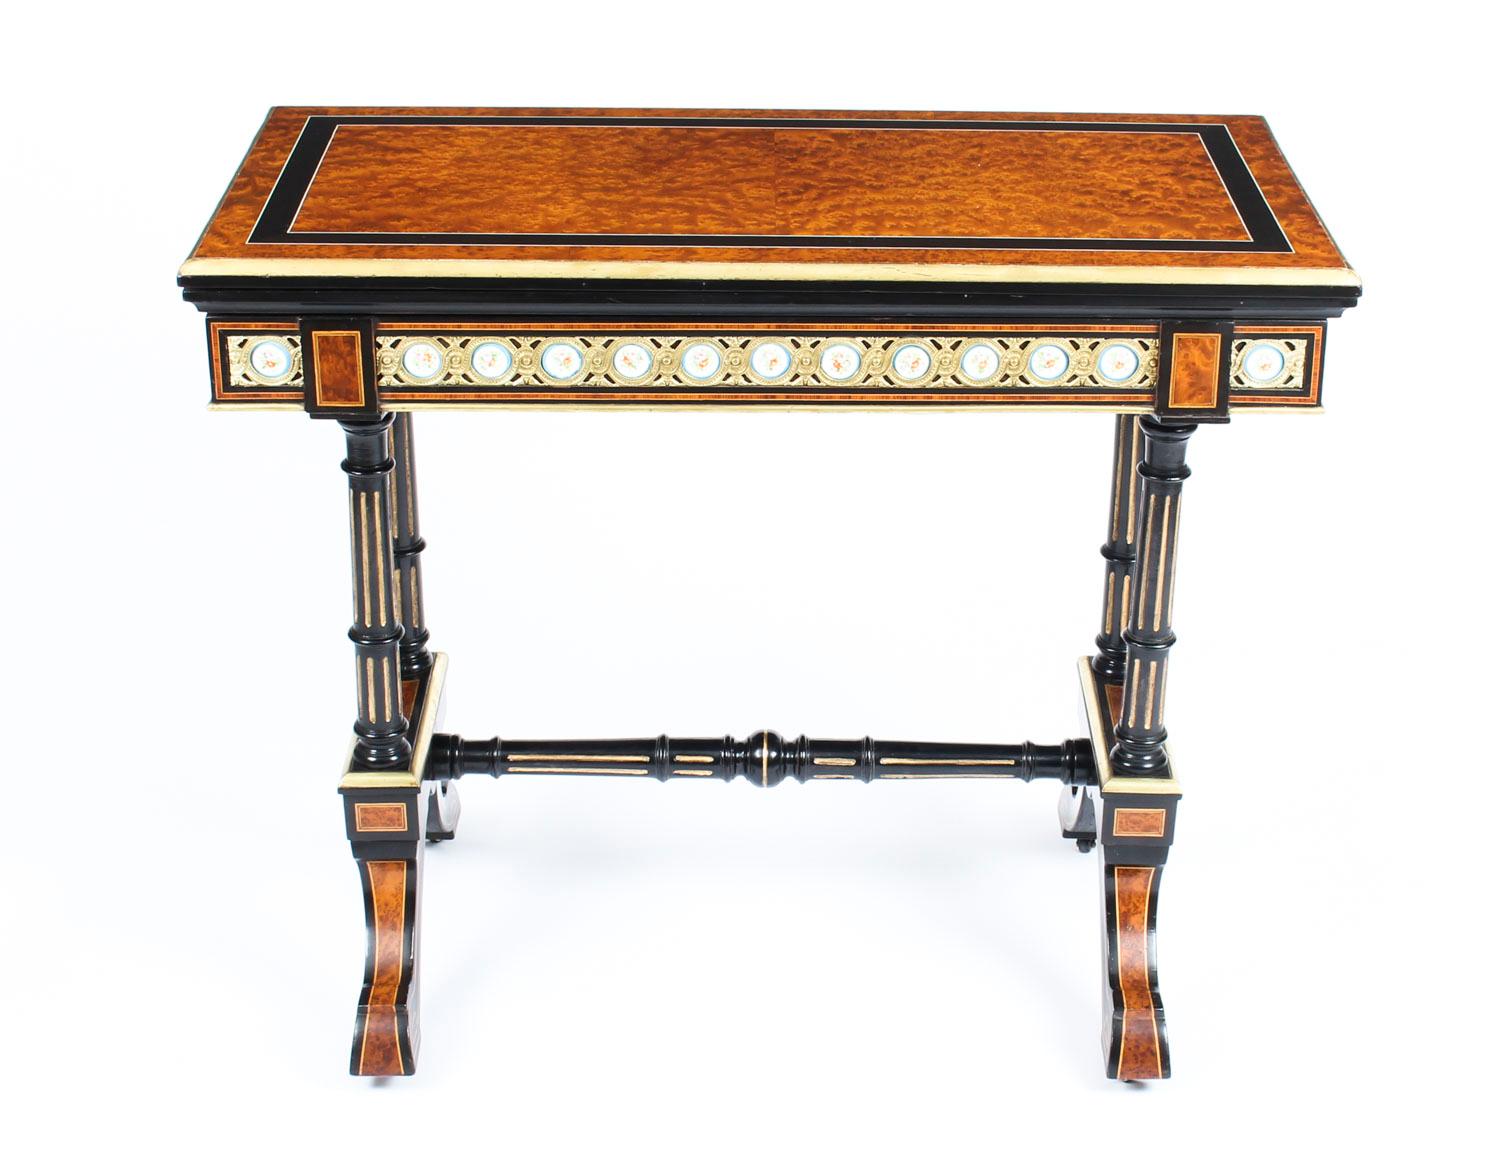 This is a magnificent antique French amboyna and ebonized card table fabulous Sevres style porcelain plaques set in decorative ormolu mounts, circa 1860 in date.

The table is made from striking and rare amboyna, and then beautifully decorated with